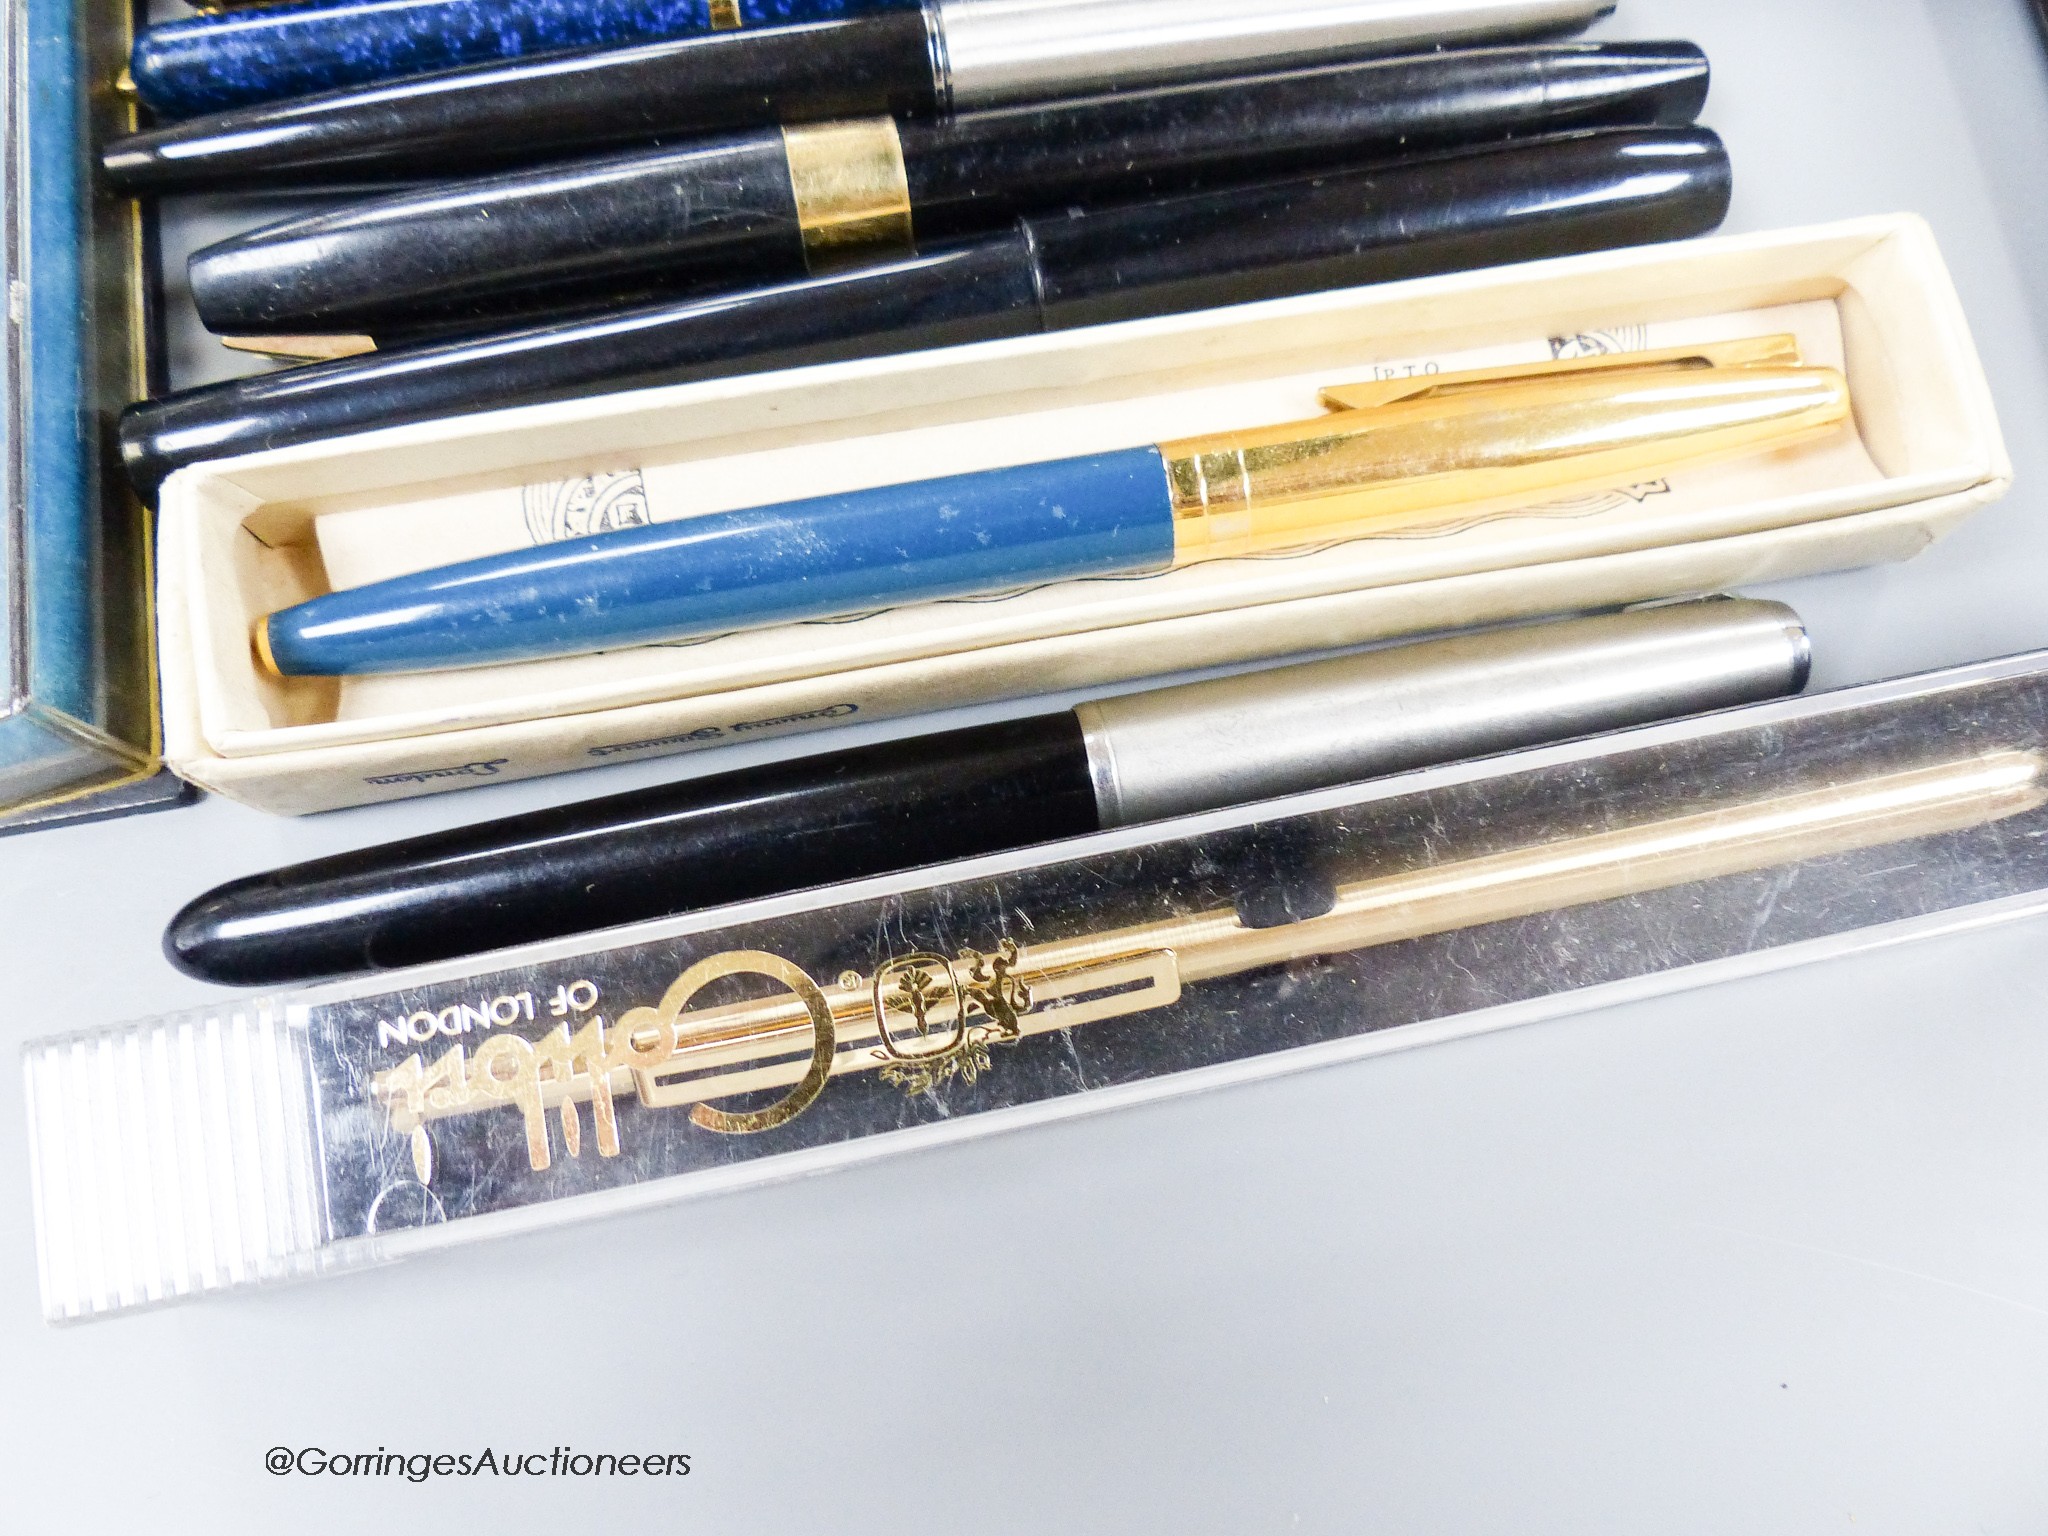 An assortment of fountain pens and ball point pens